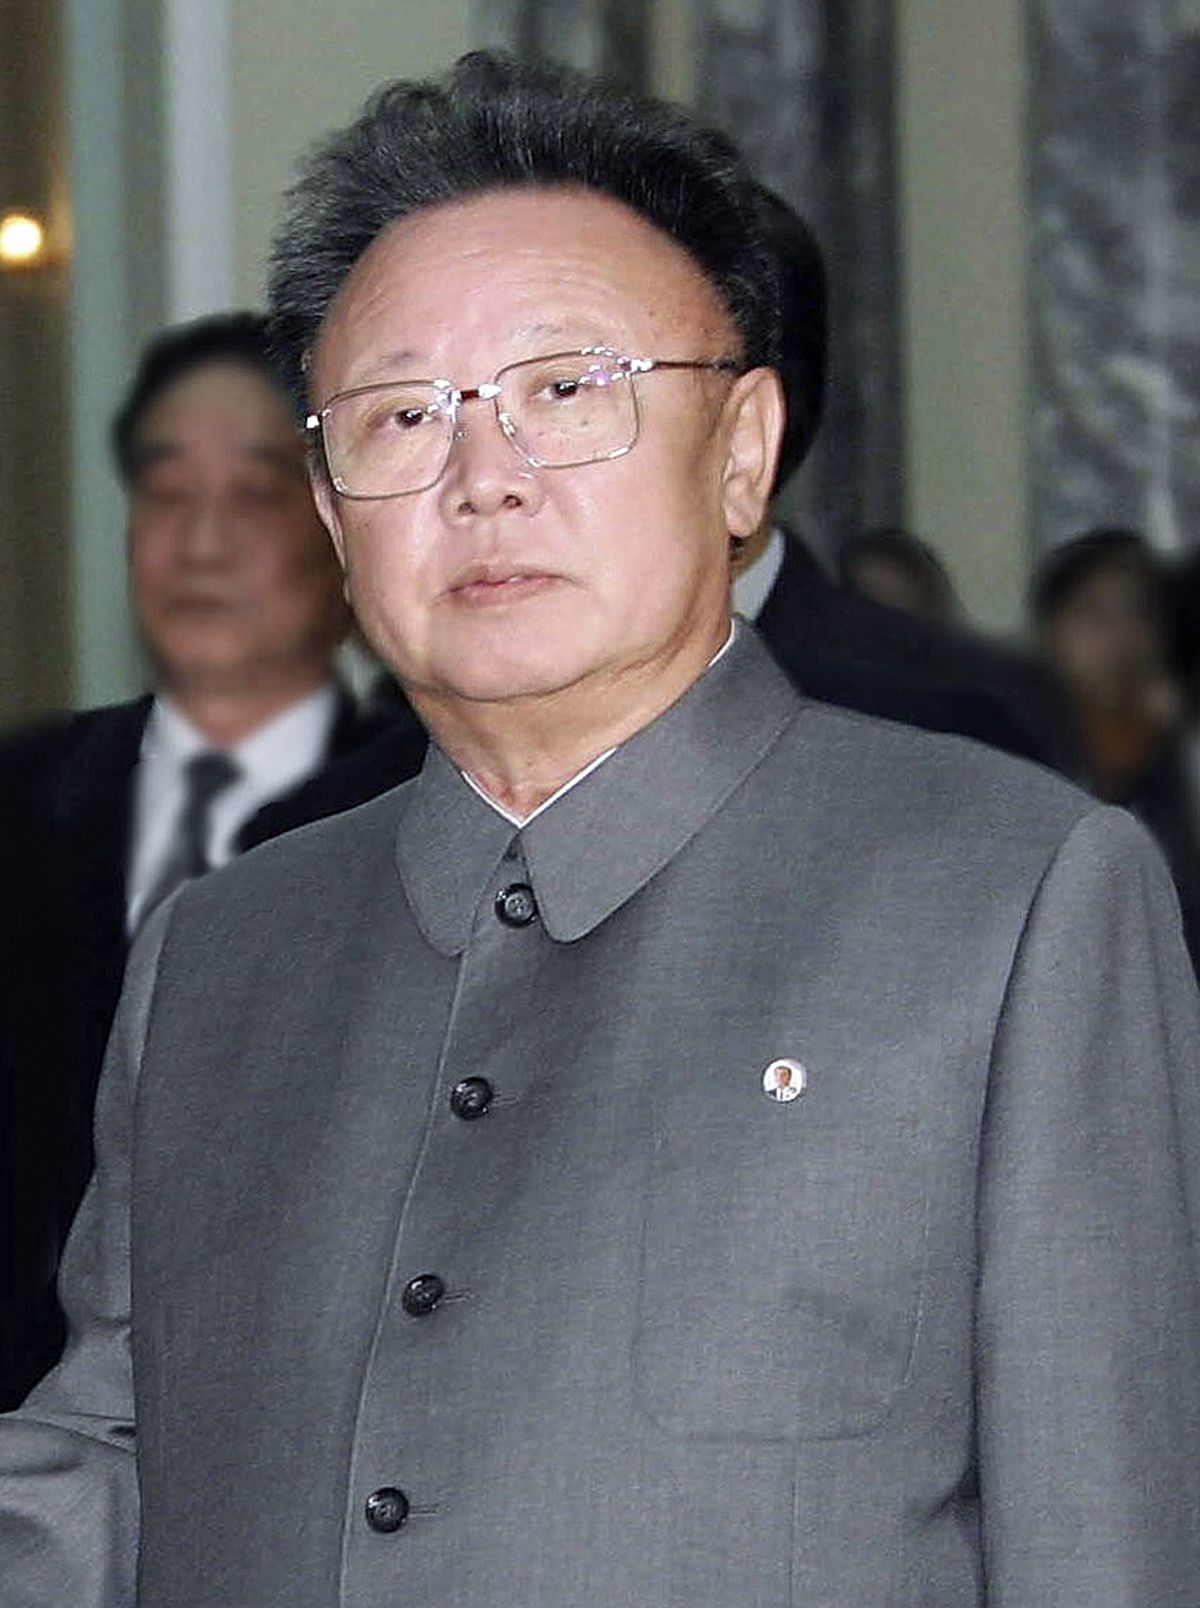 Kim Jong-il Ruler of nuclear state since father’s death in 1994 (The Spokesman-Review)